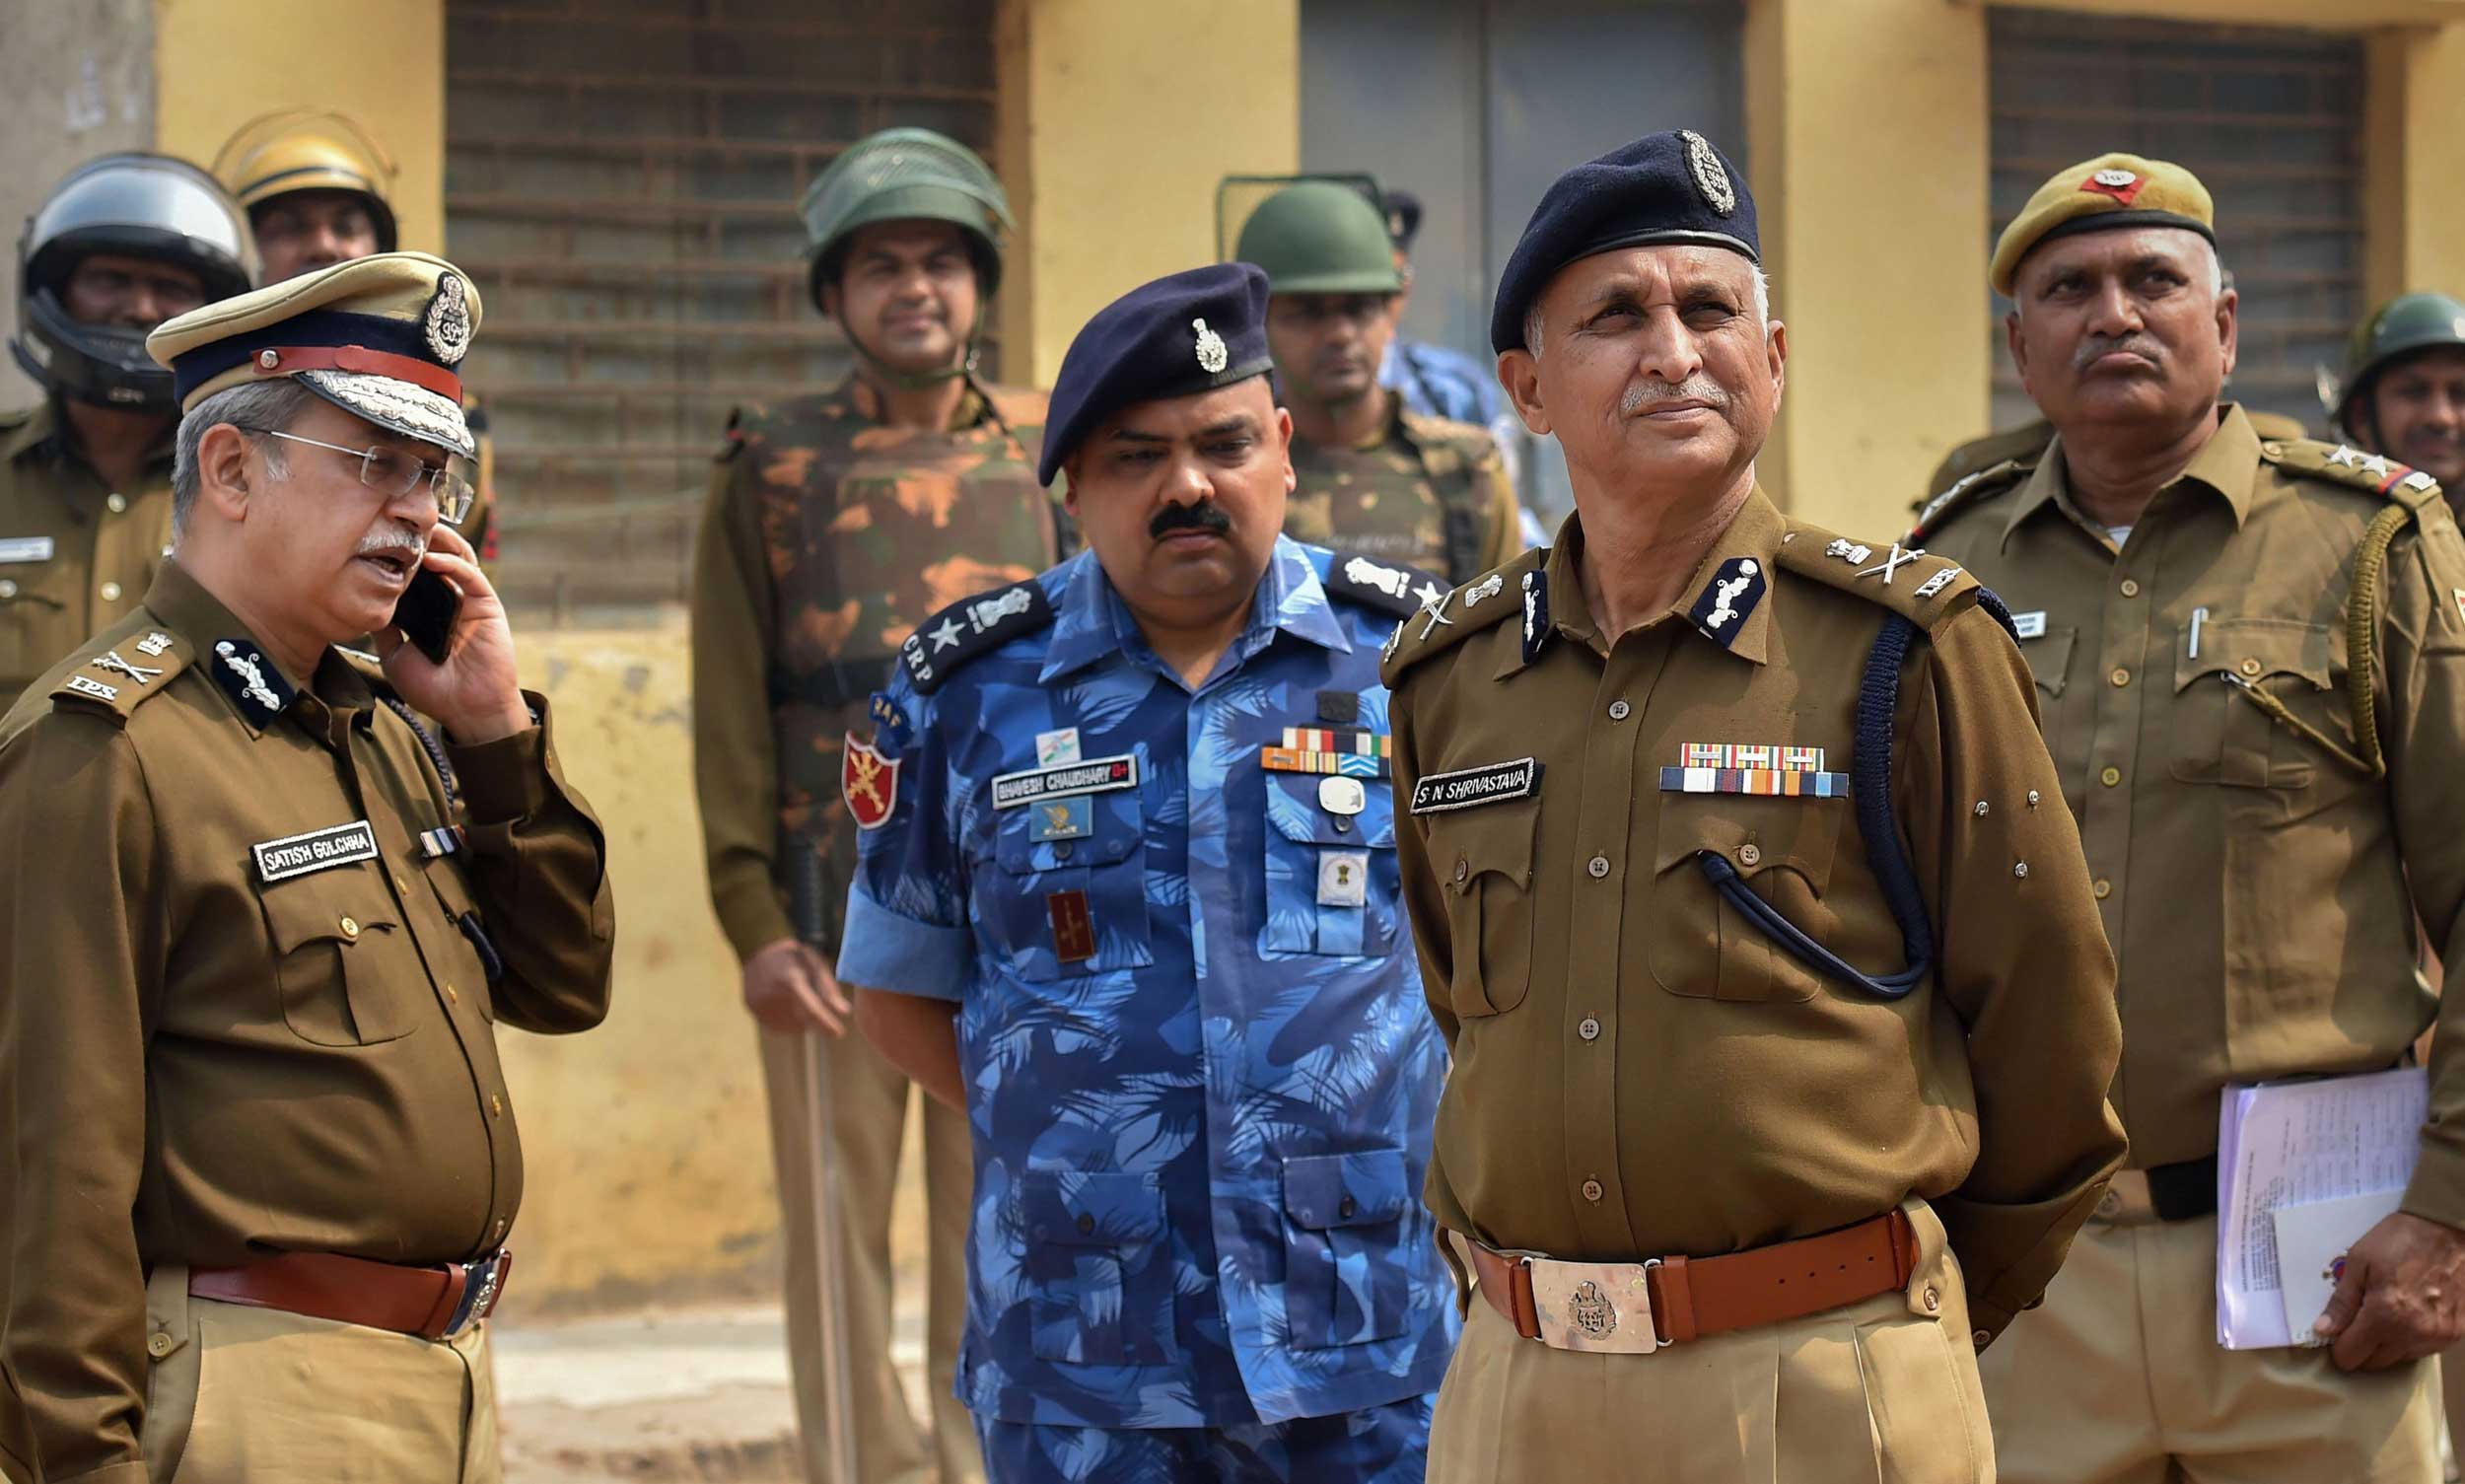 Delhi police commissioner S.N. Srivastava and Delhi police special commissioner (crime) Satish Golcha inspect Johar area of the riot-affected are in north east Delhi on Wednesday.